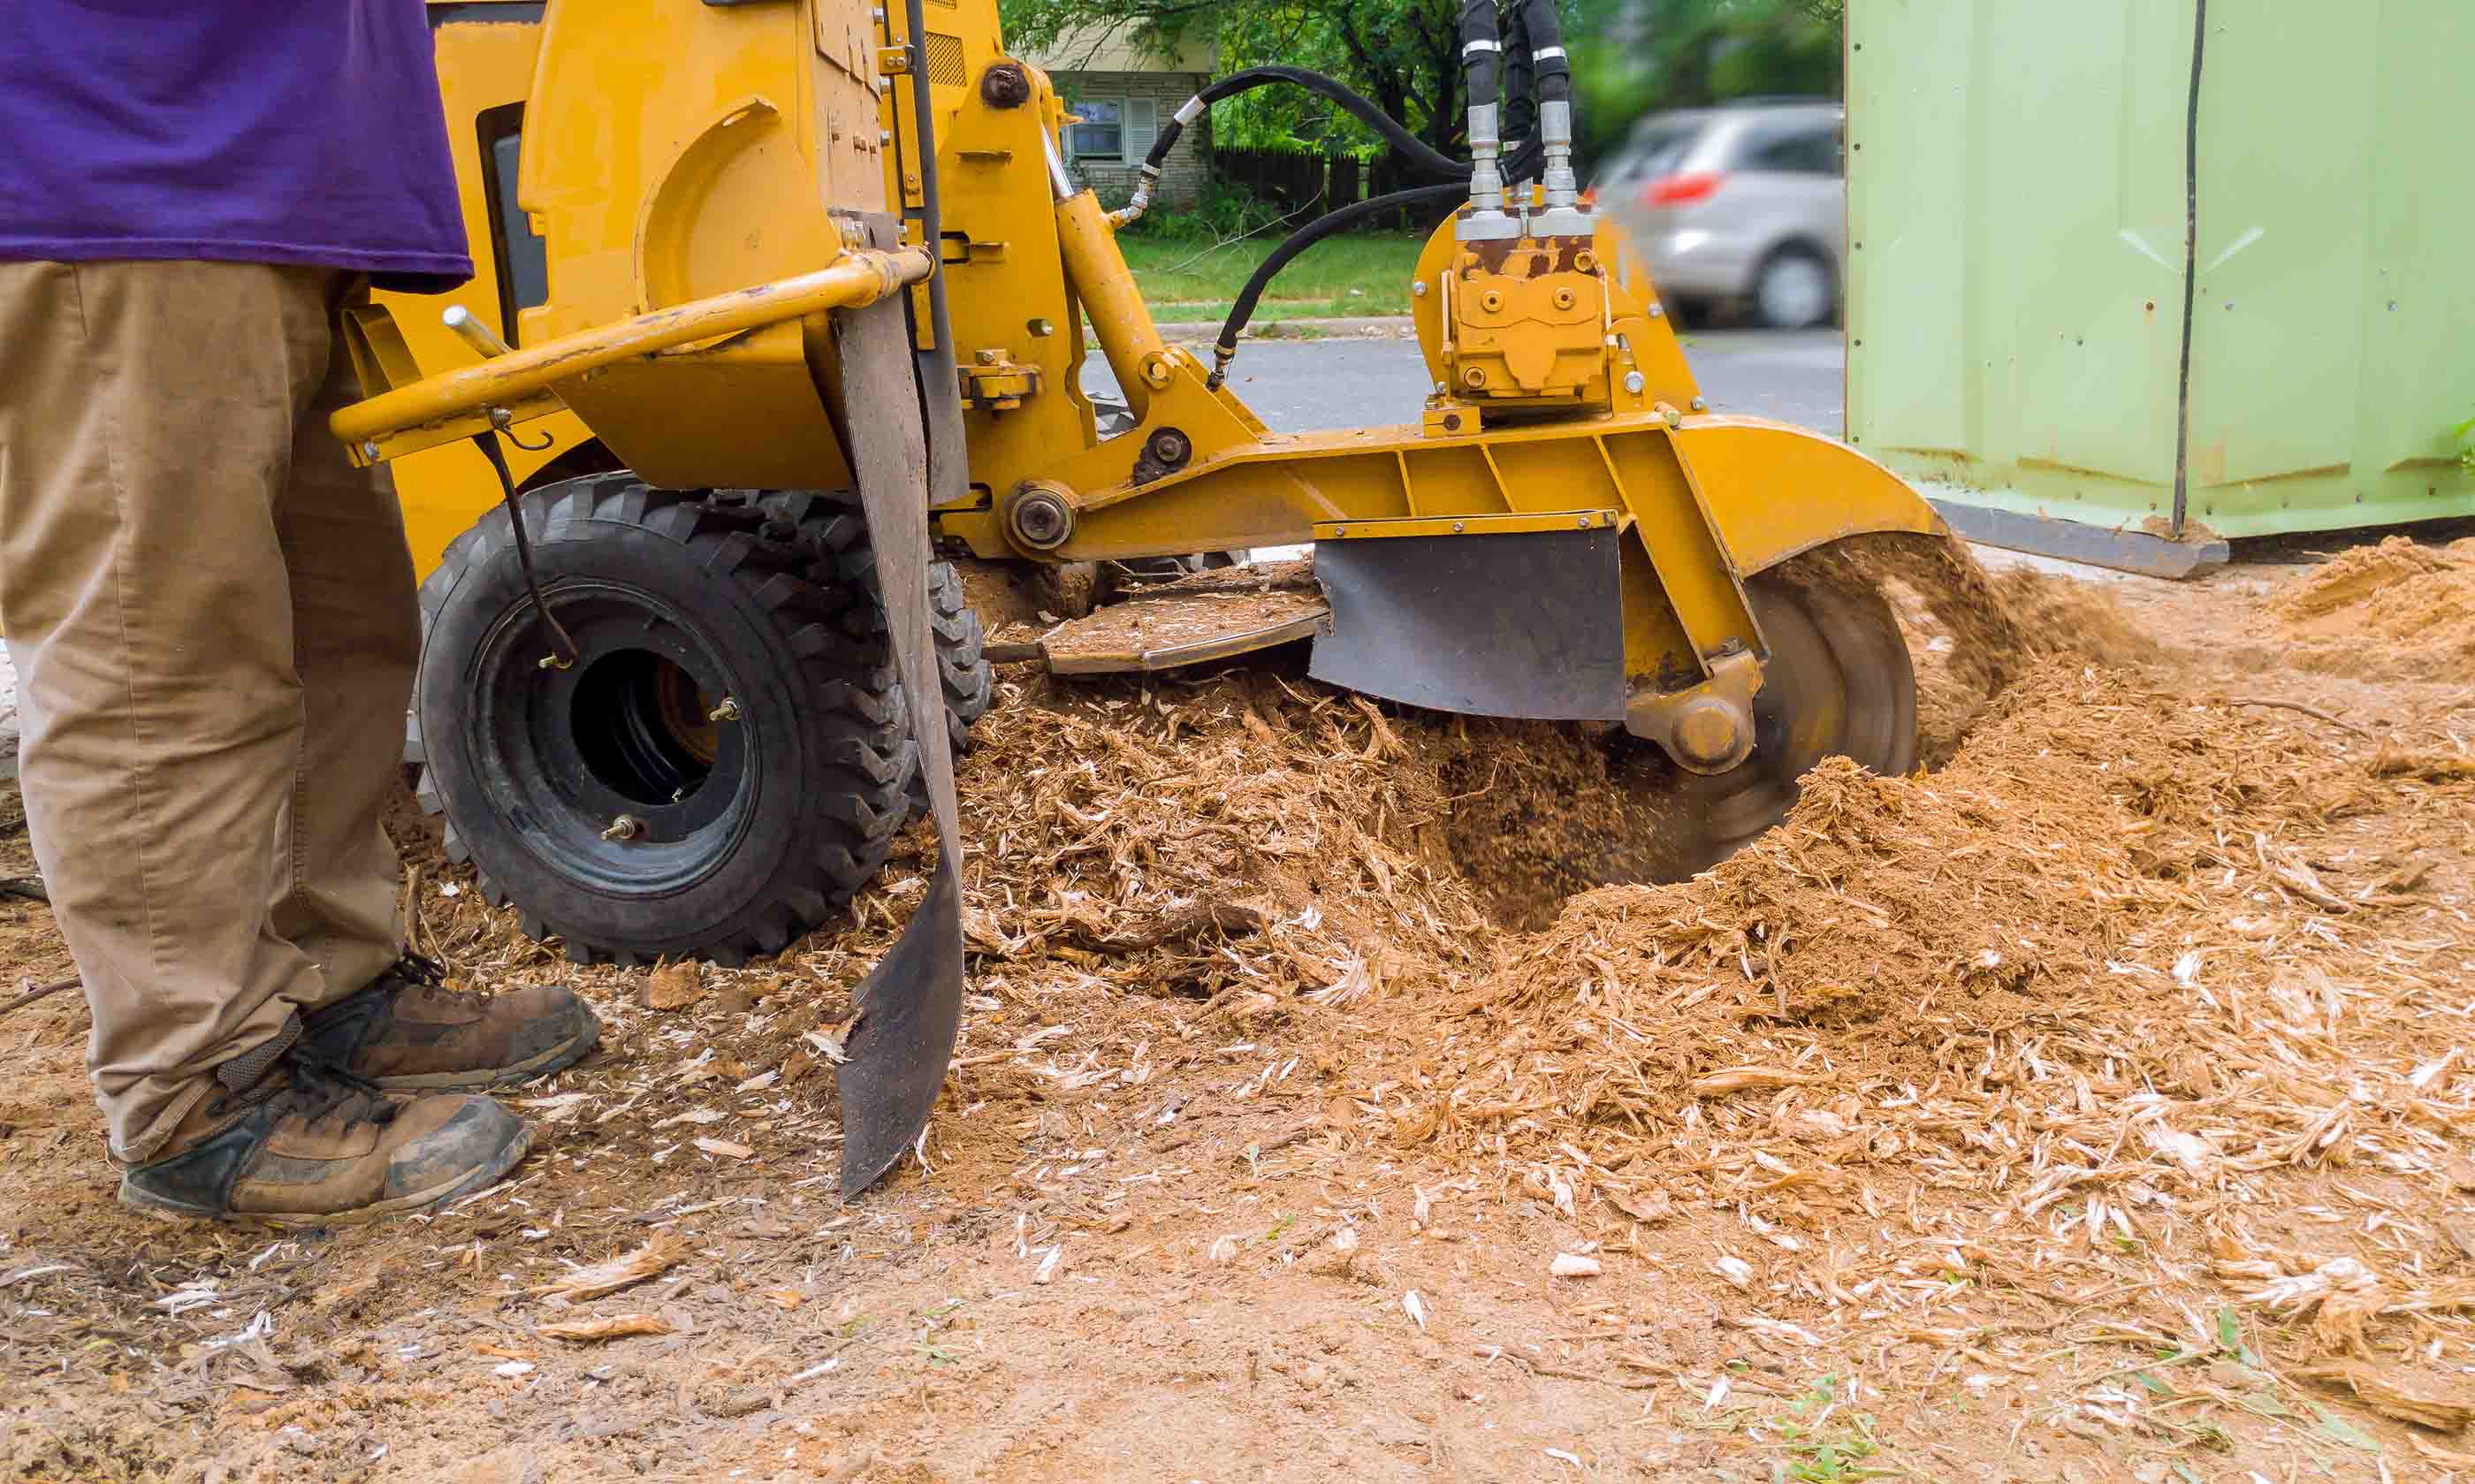 Stump Grinding-Palm Beach Island Tree Trimming and Tree Removal Services-We Offer Tree Trimming Services, Tree Removal, Tree Pruning, Tree Cutting, Residential and Commercial Tree Trimming Services, Storm Damage, Emergency Tree Removal, Land Clearing, Tree Companies, Tree Care Service, Stump Grinding, and we're the Best Tree Trimming Company Near You Guaranteed!